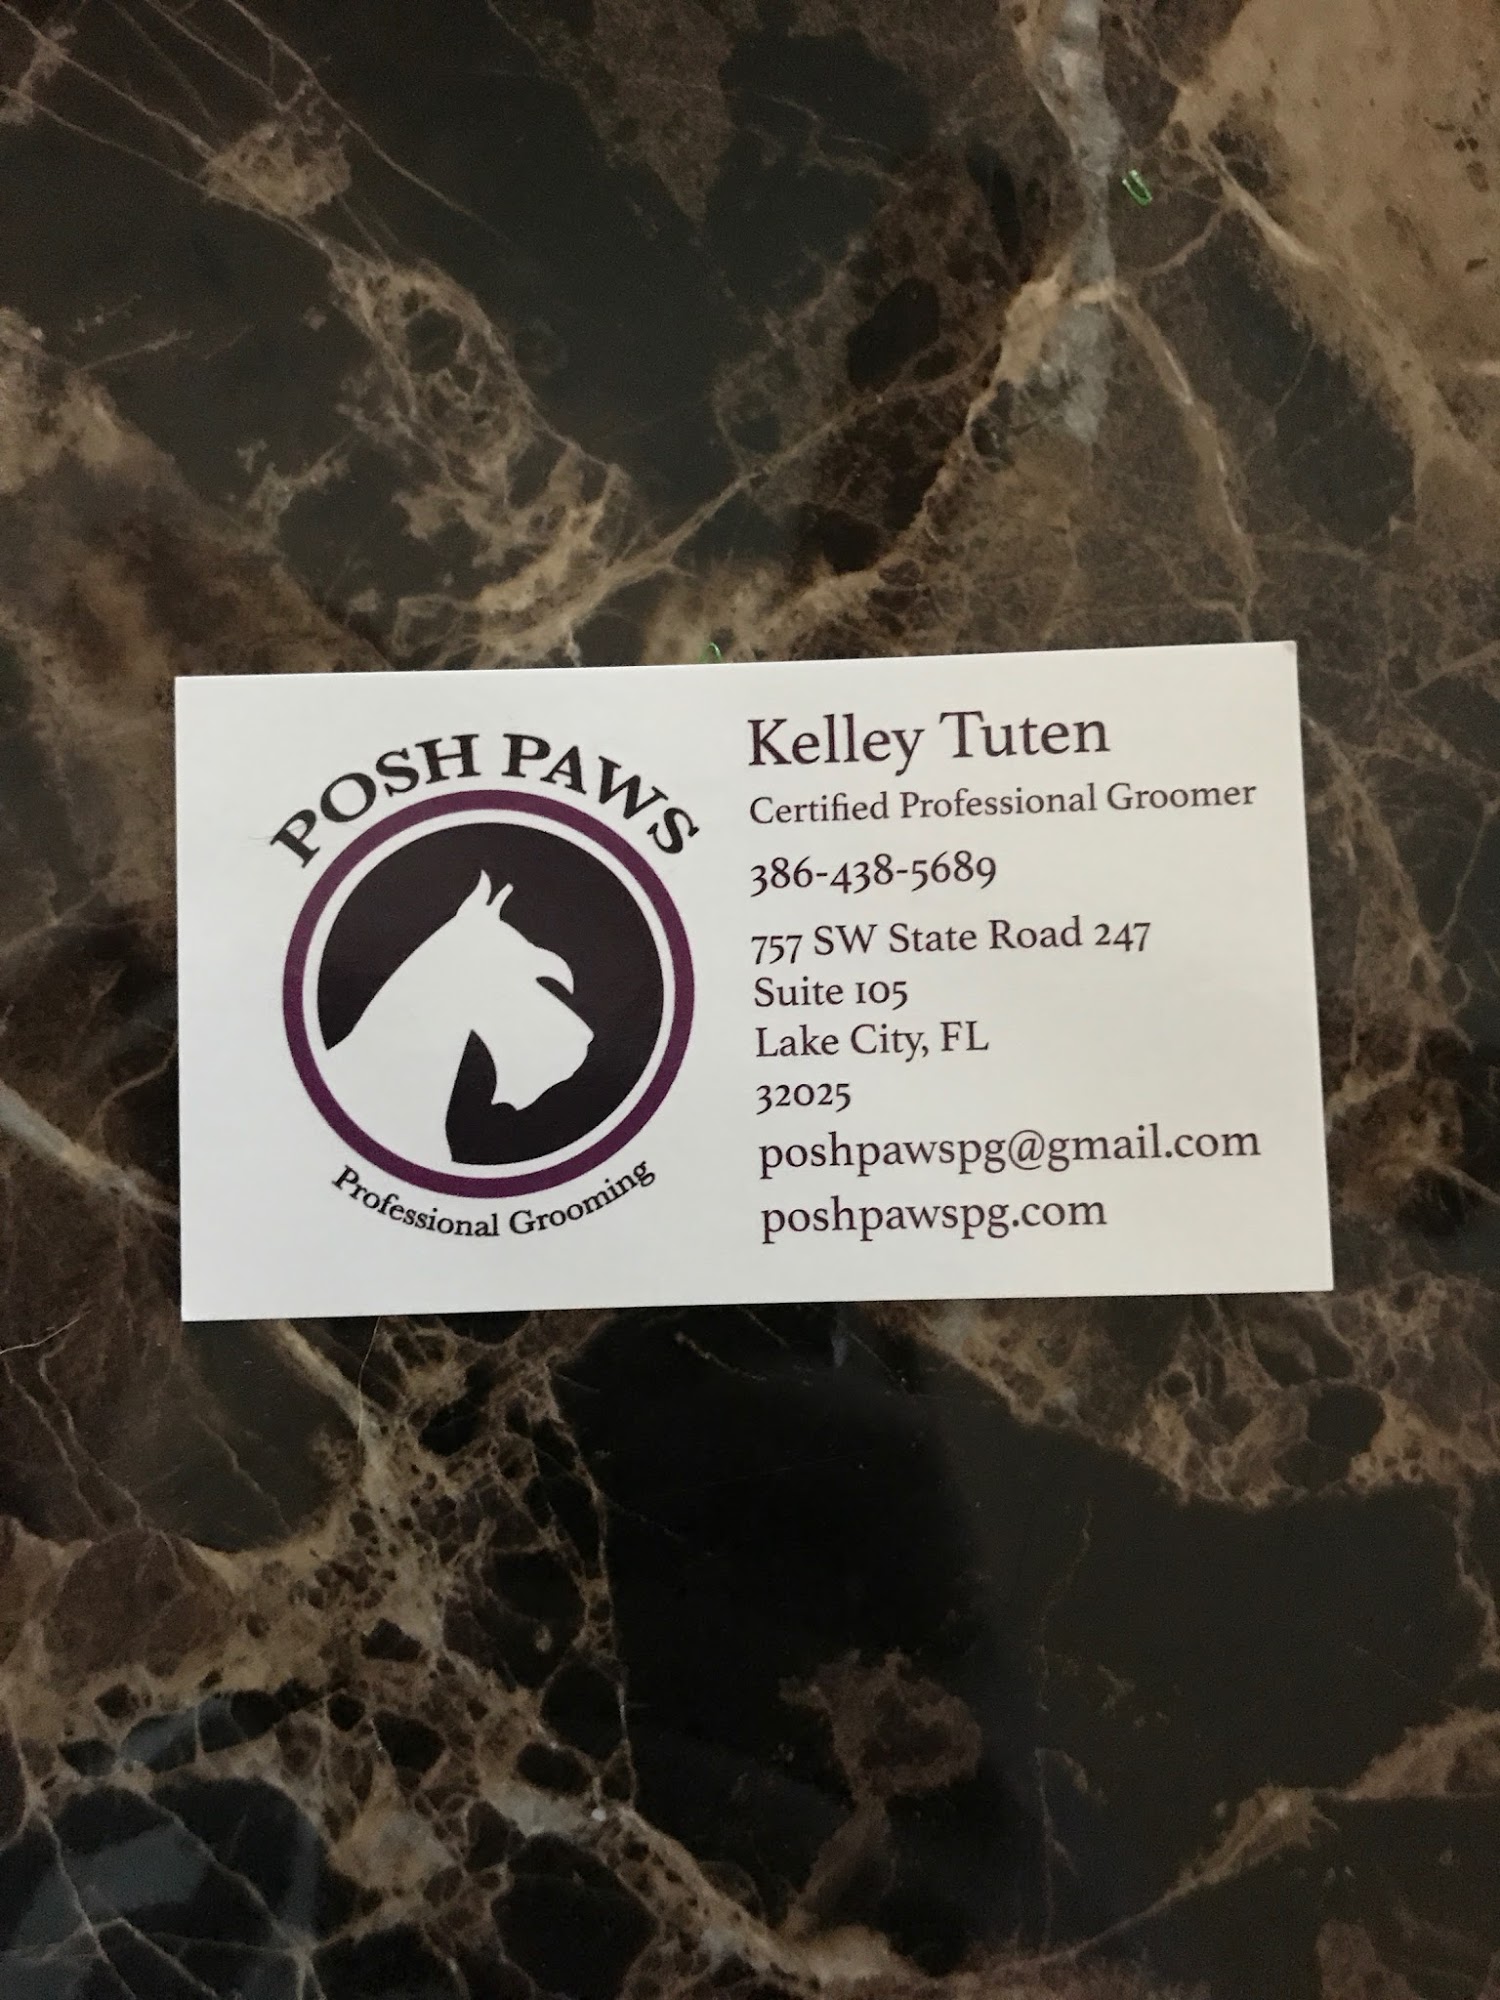 Posh Paws Professional Grooming